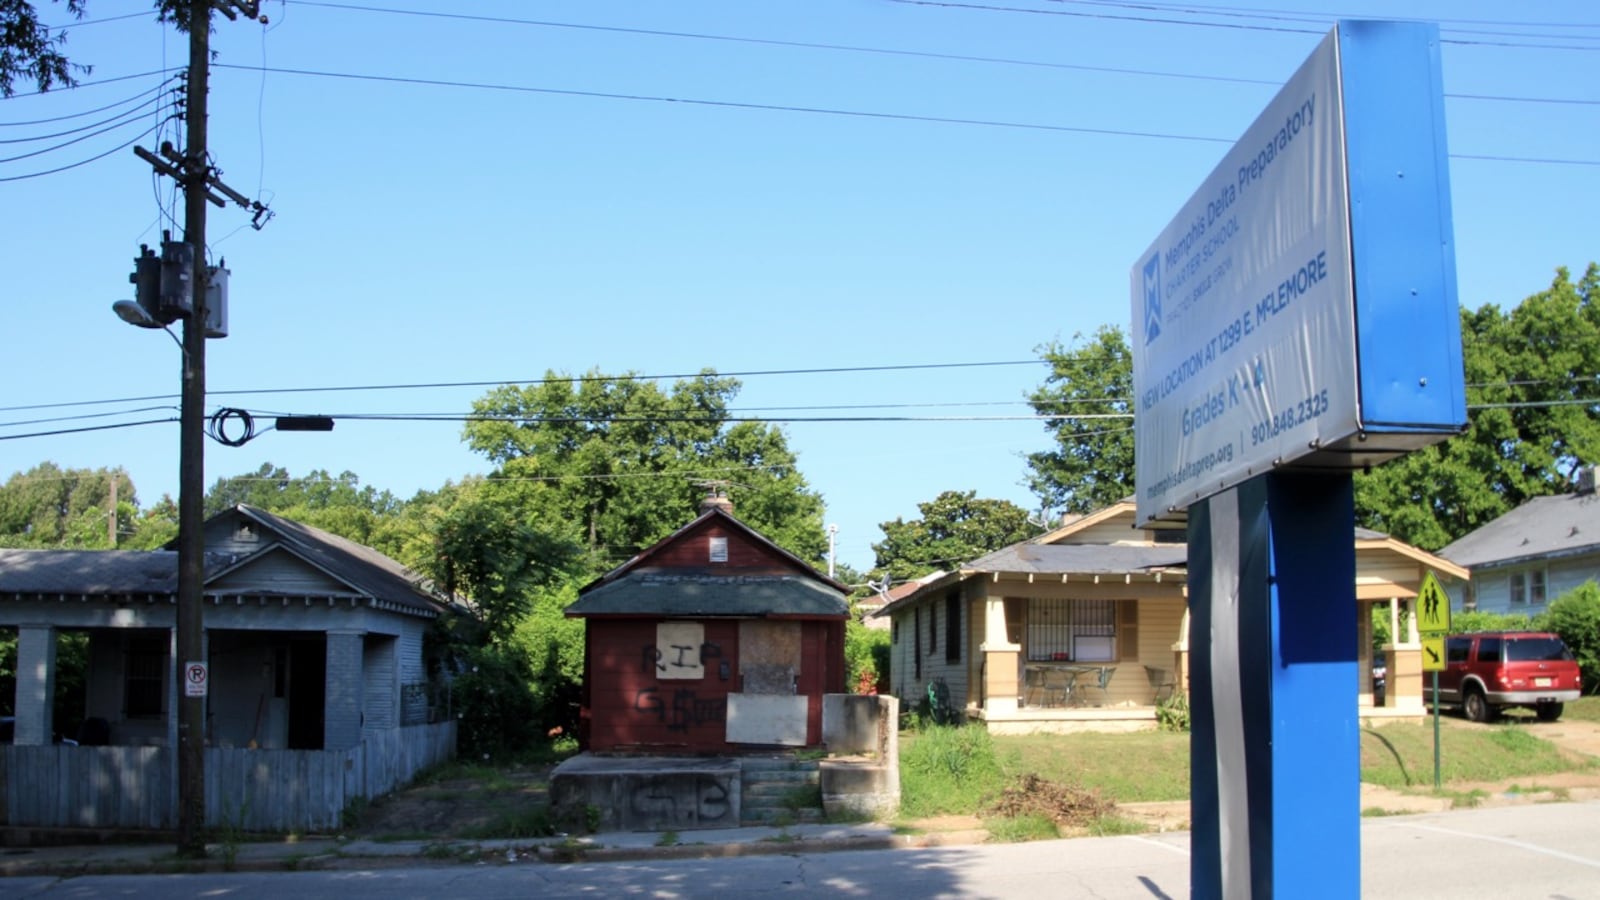 Neighborhoods in South Memphis surround Memphis Delta Preparatory Charter School, which opens in August through Shelby County Schools.